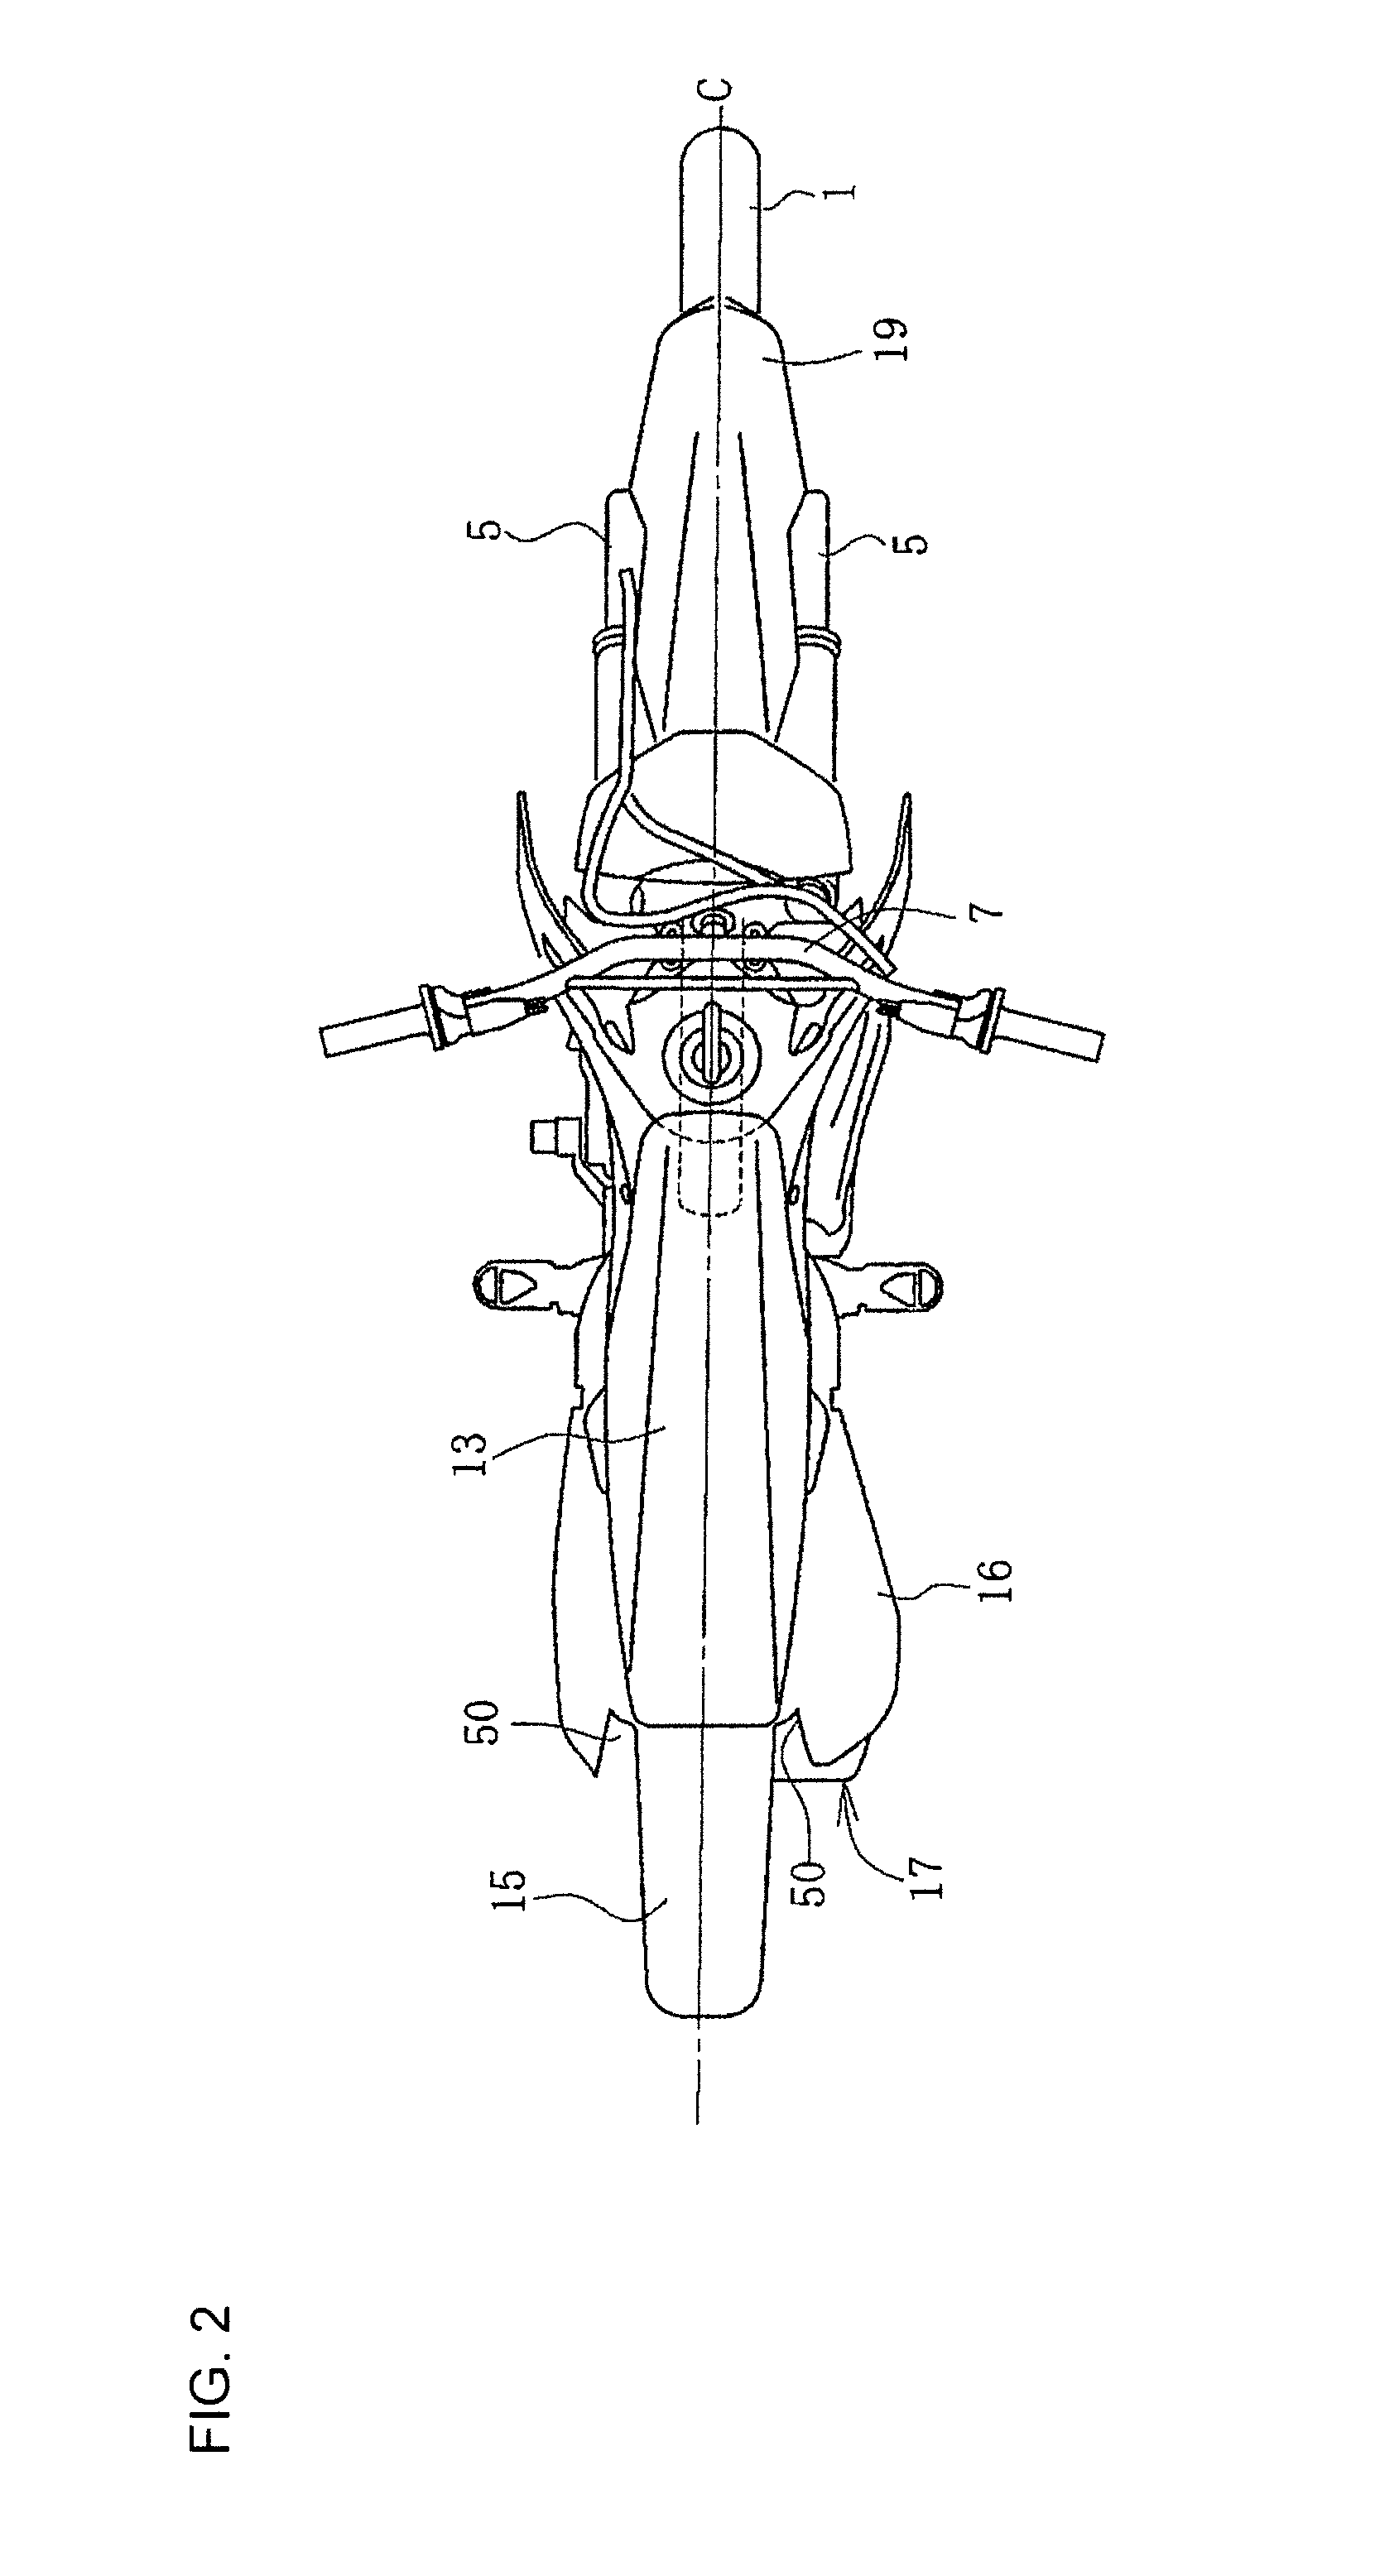 Muffler device for motorcycle